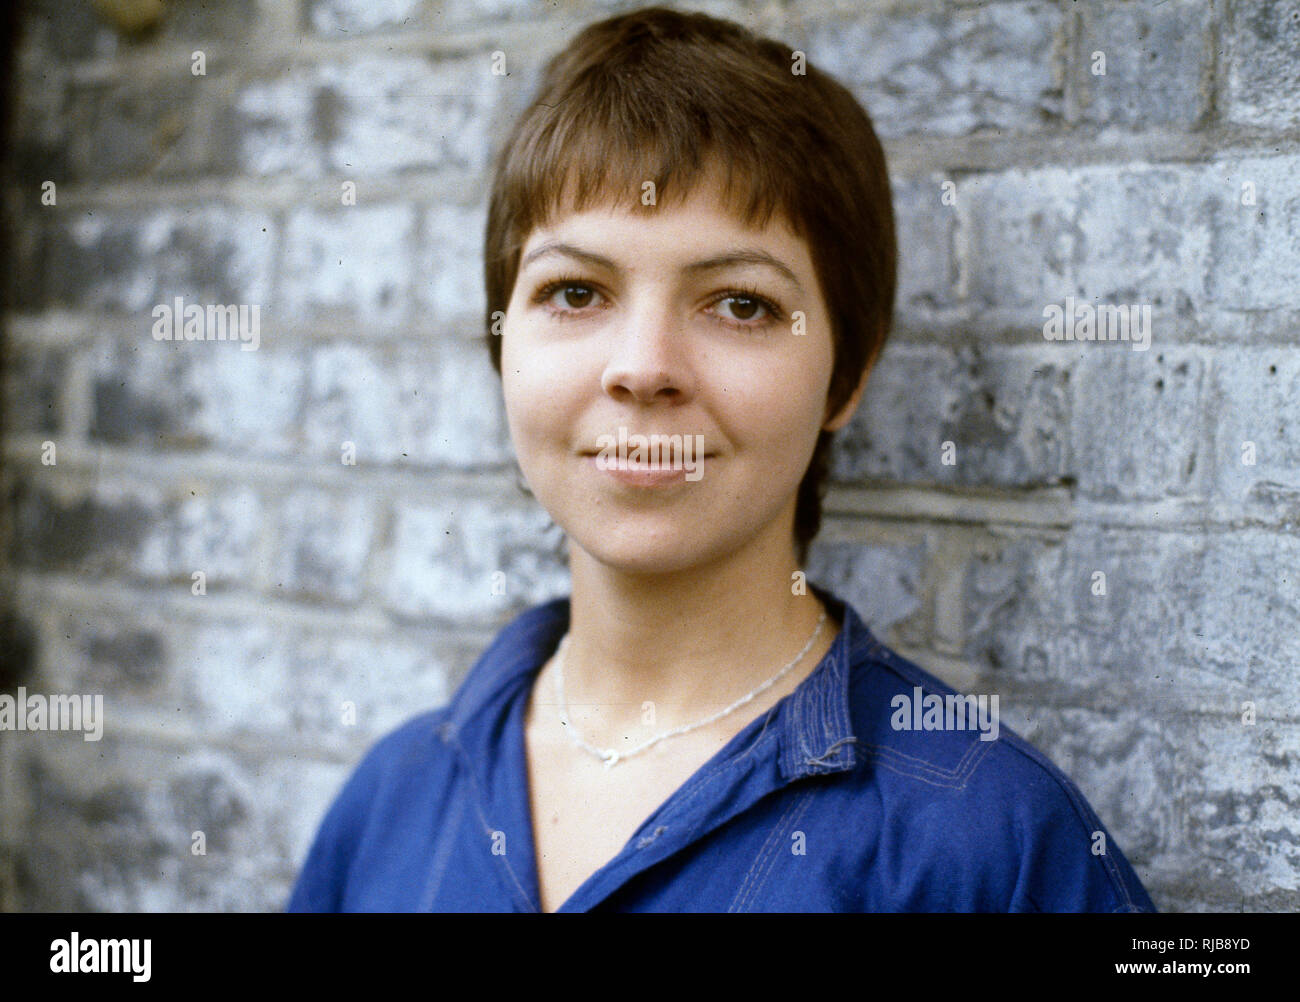 Tessa Peake-Jones (1957-) - English actress. She is known for her role as Raquel in the BBC sitcom 'Only Fools and Horses'. Shown here whilst filming a series entitled 'The Danedyke Mystery' for Granada Television in 1979. Stock Photo